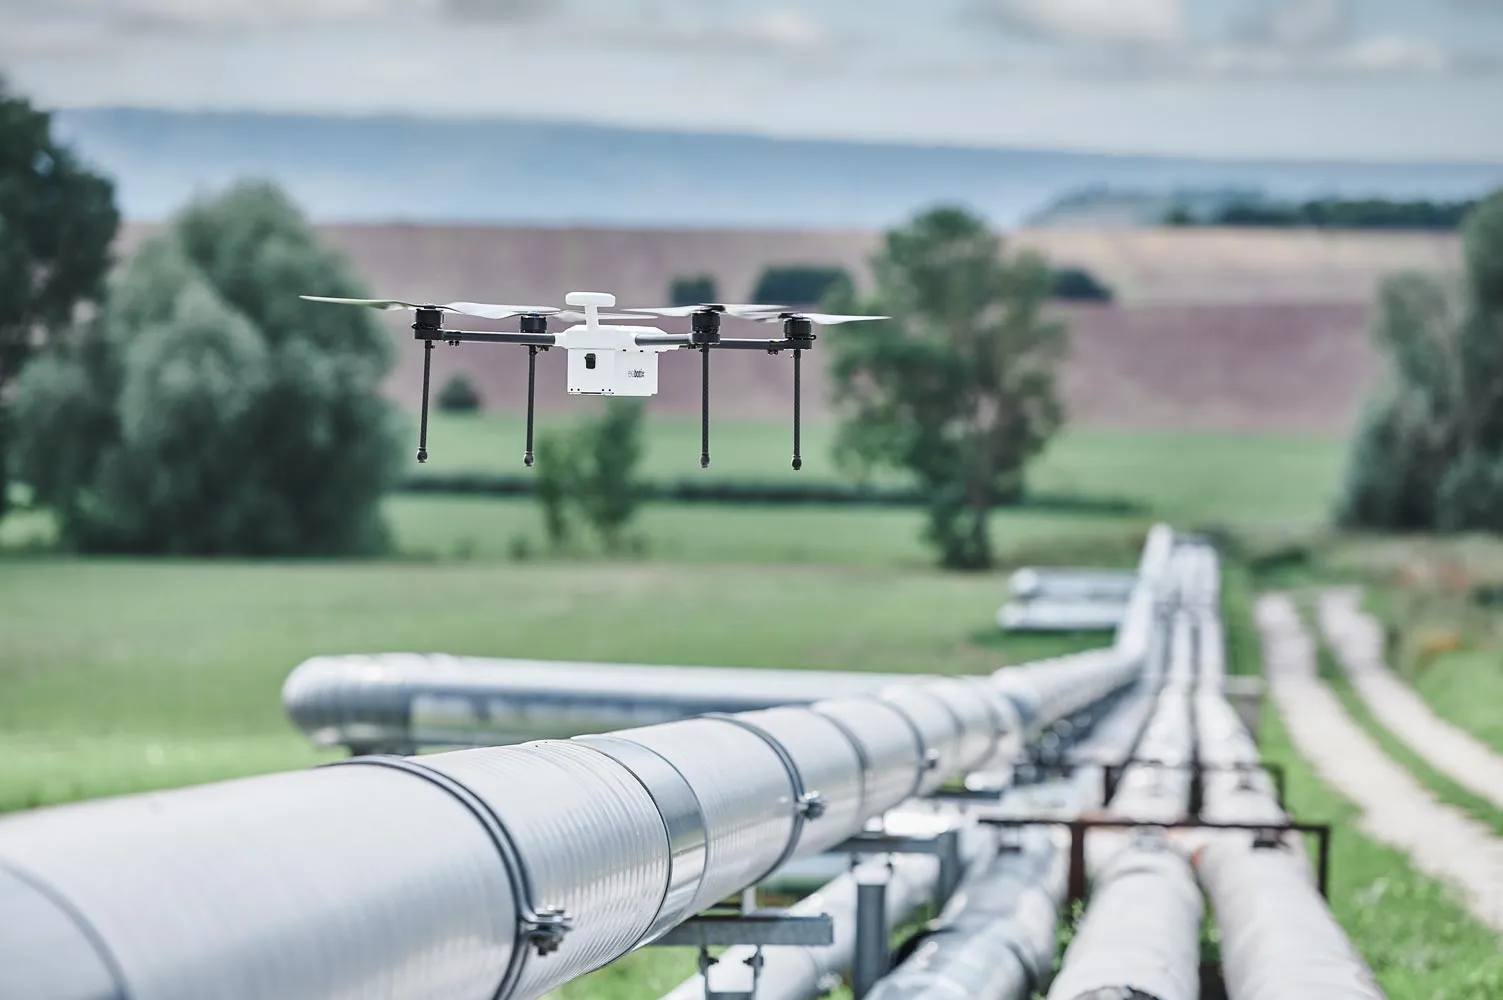 Zelos drone hovers over a pipeline running through an uninhabited landscape.